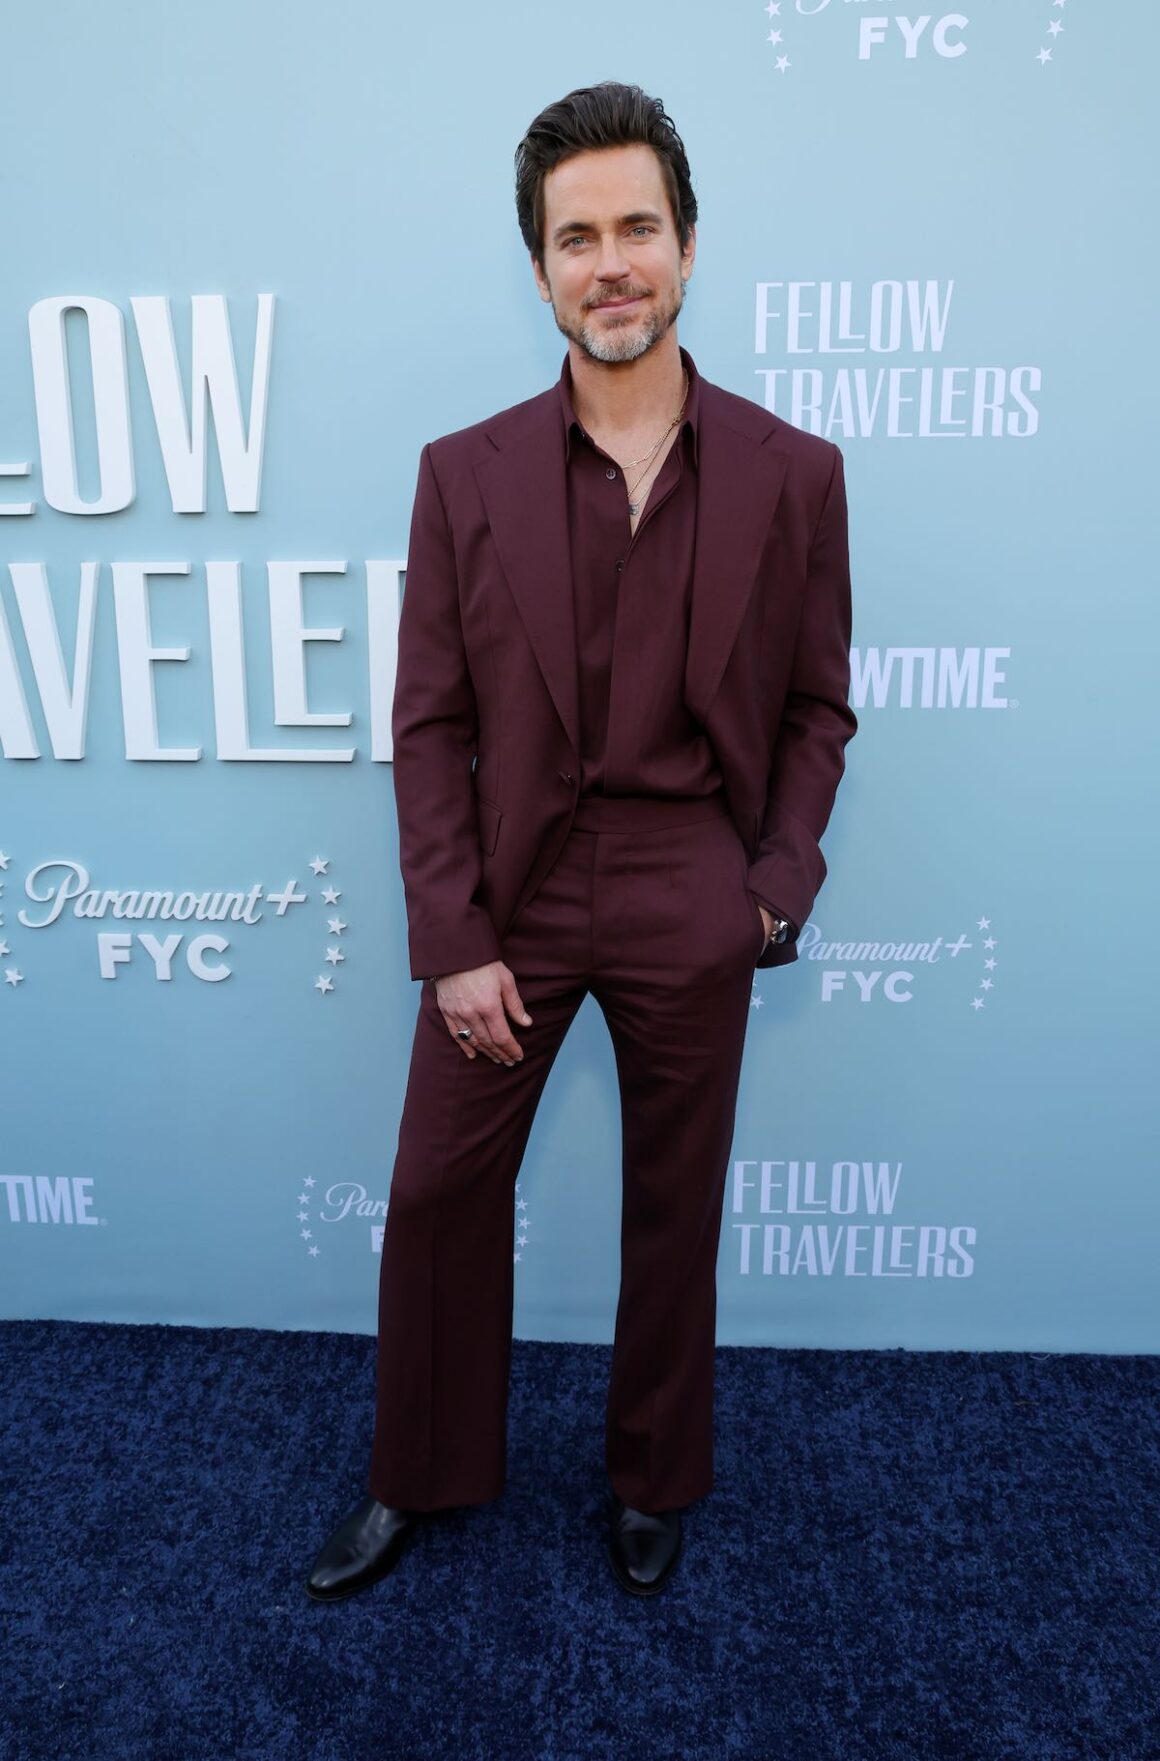 Showtime's 'Fellow Travelers' FYC Event